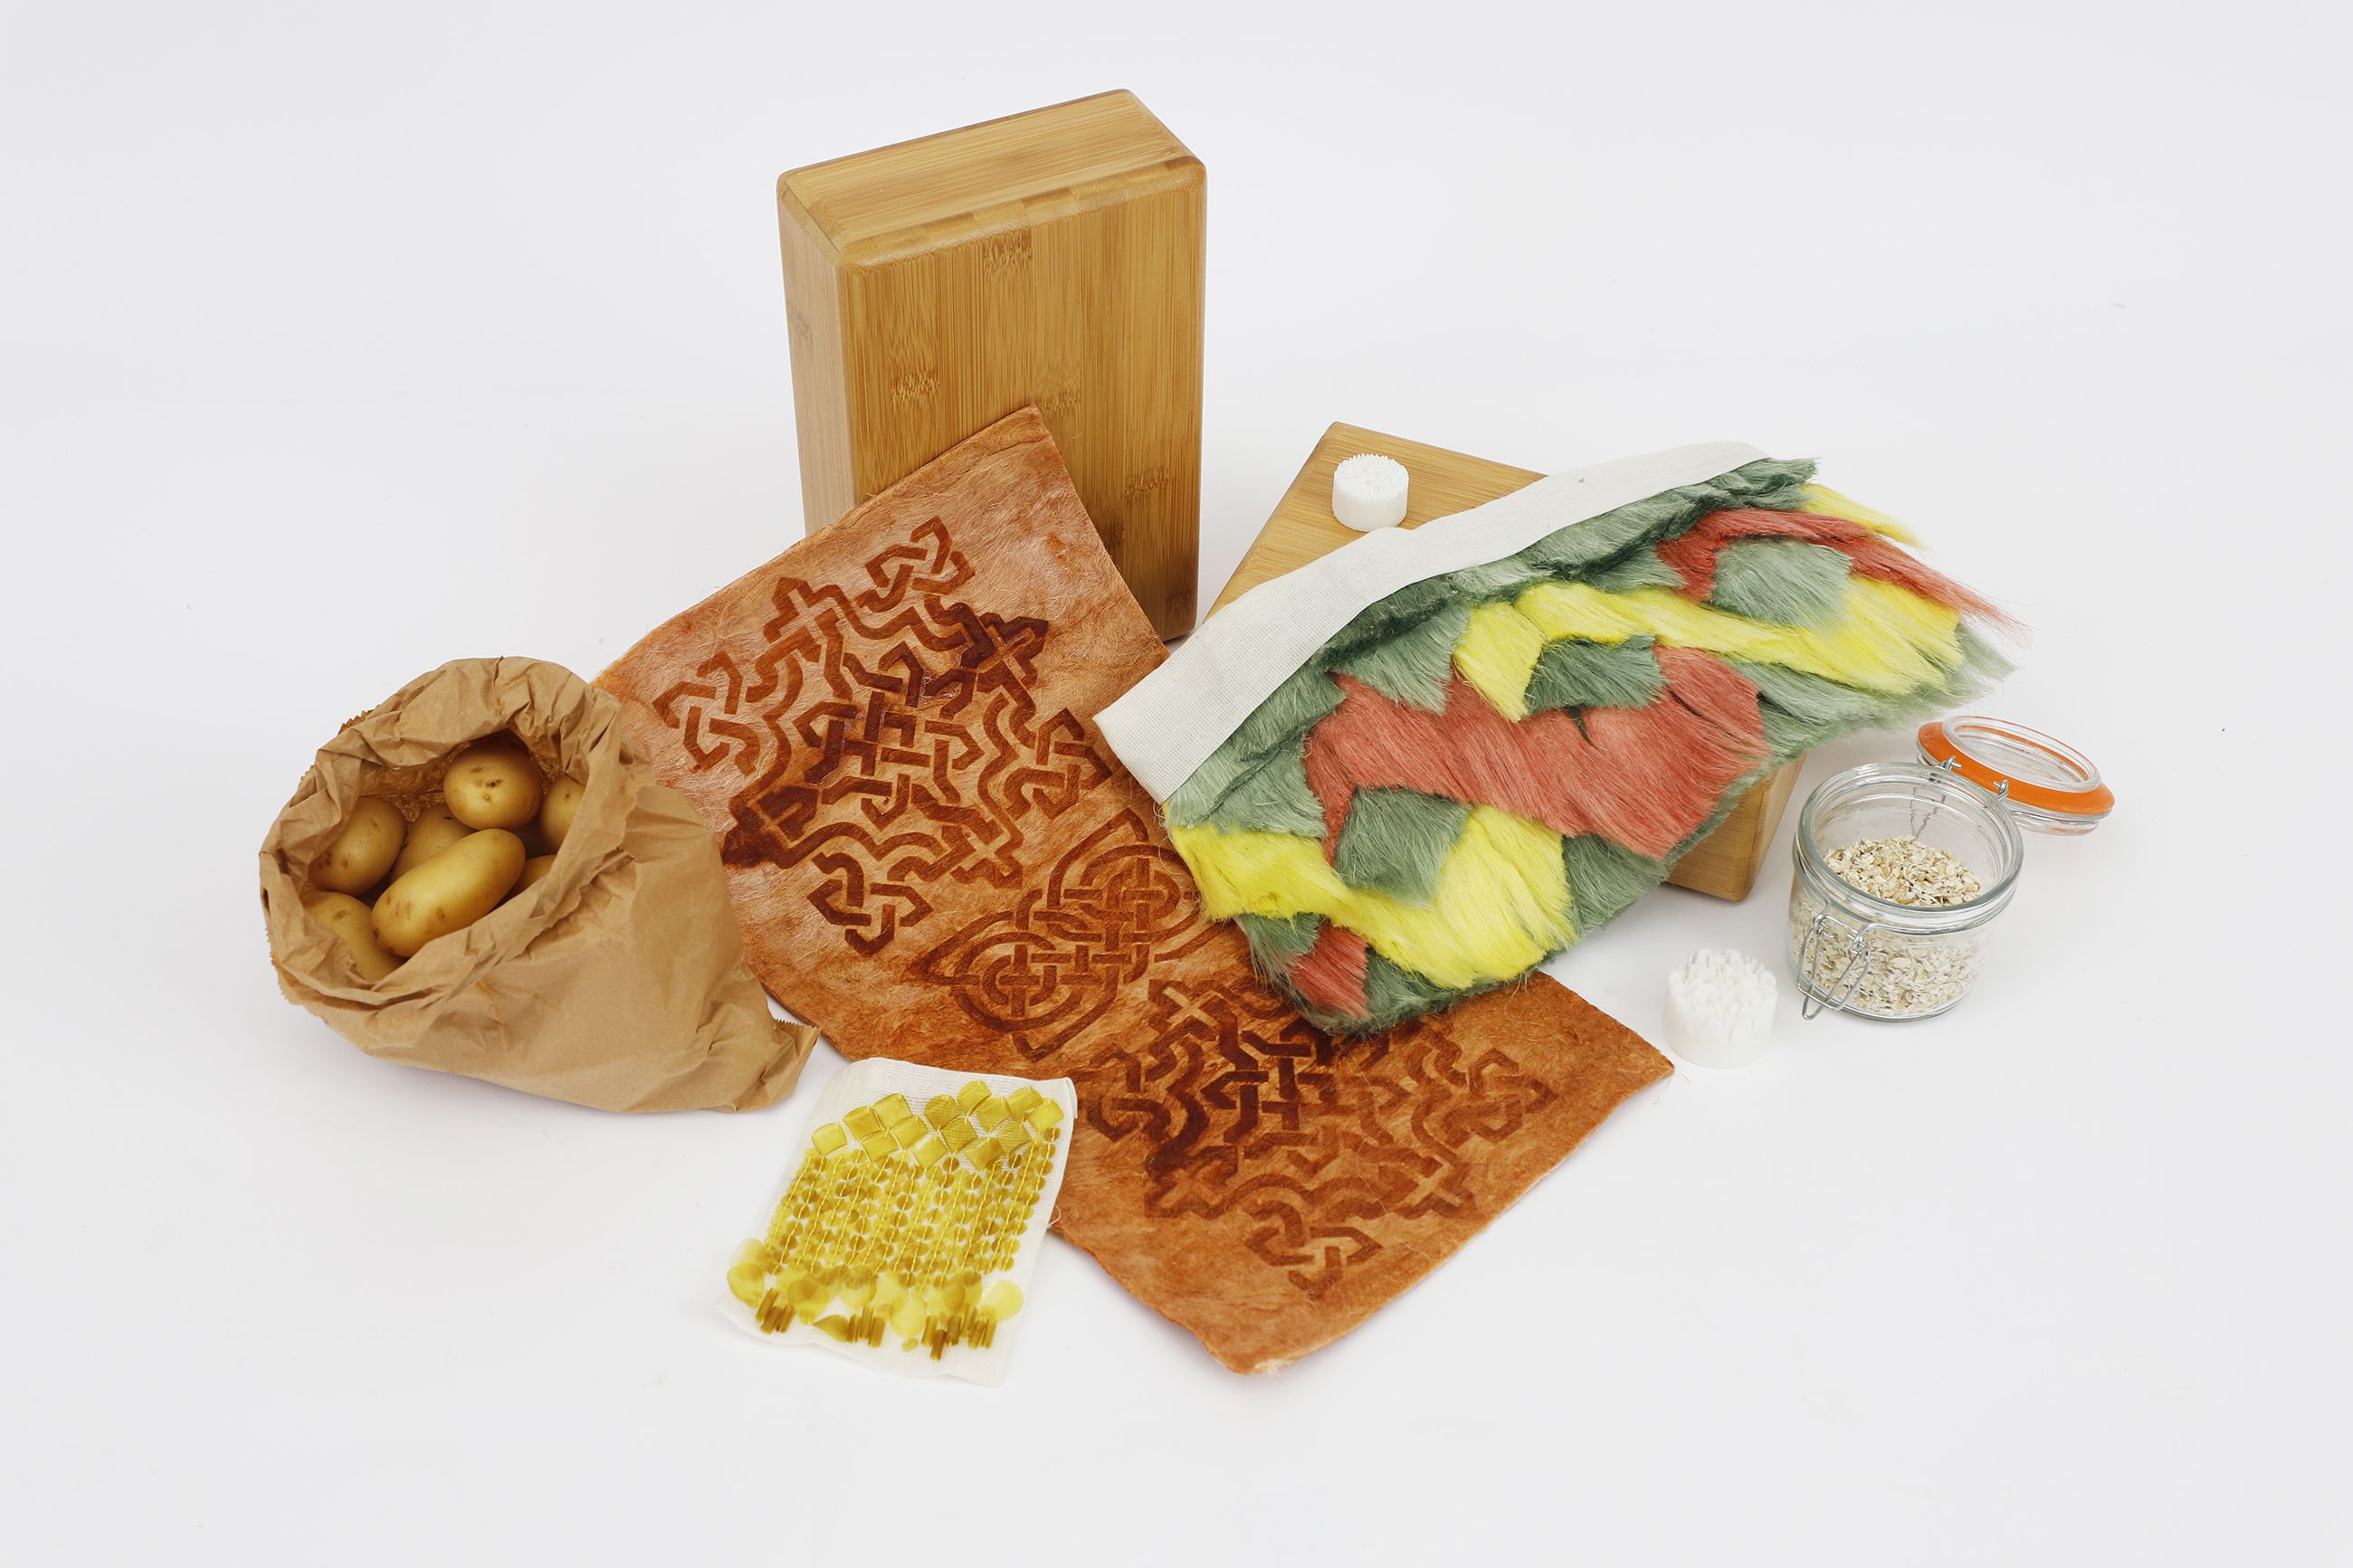 a variety of objects including potatoes and oats against a white background